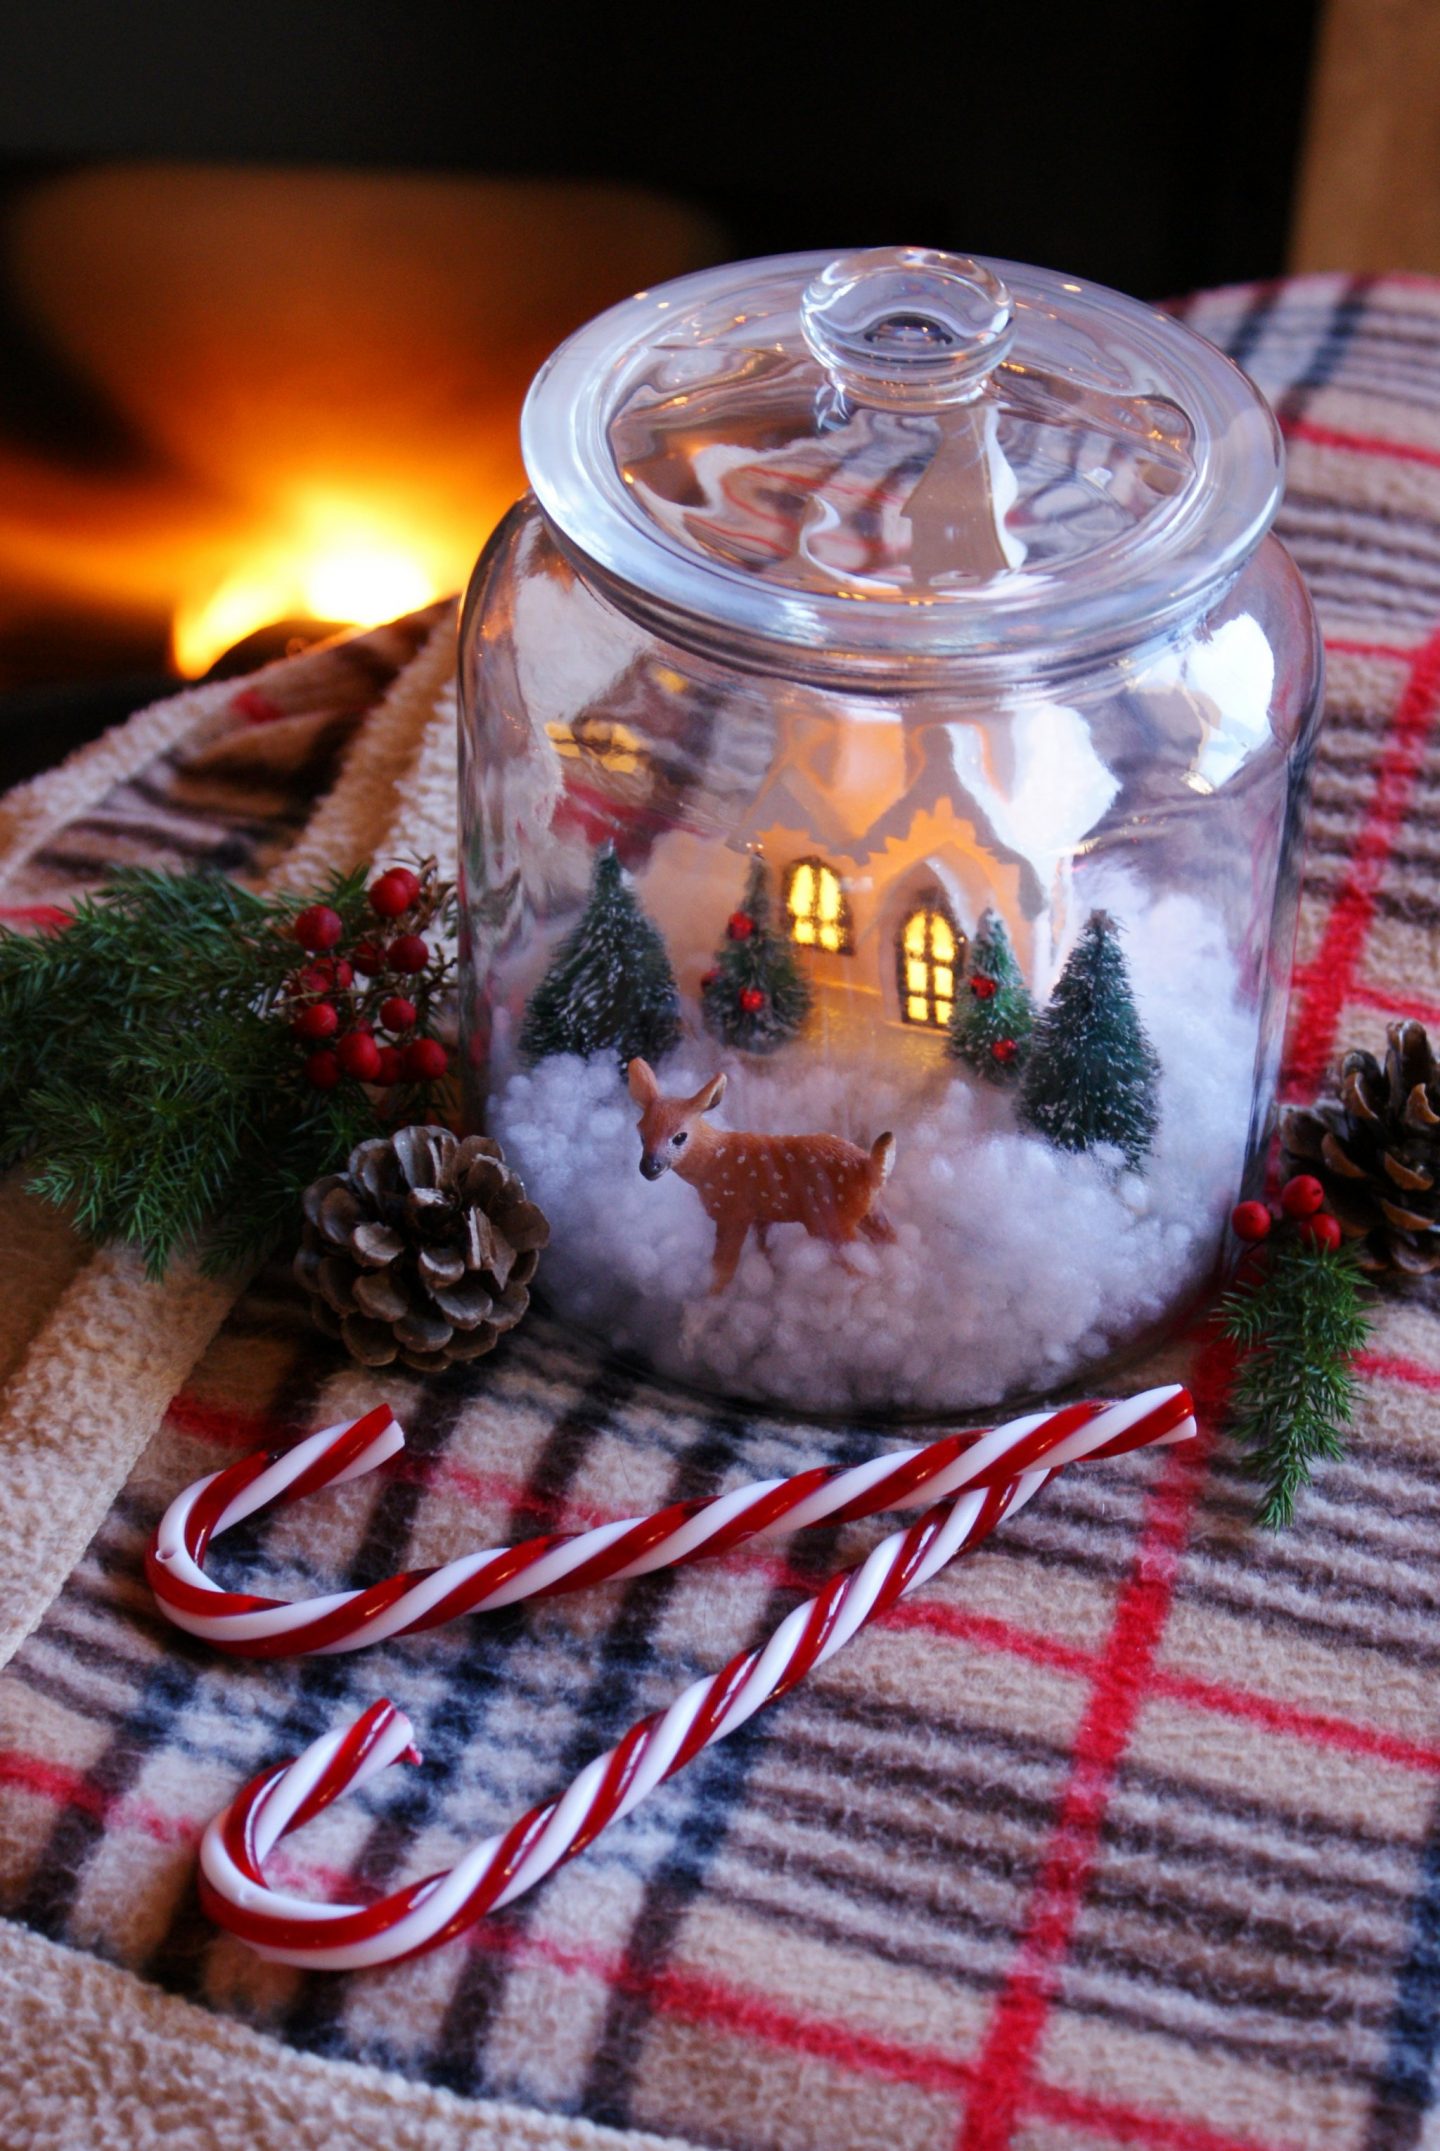 A cozy little snow scene sits inside a glass jar.  There is a small house with lights in the windows and a deer walking out front, surrounded by pine trees.  The jar sits on a fleece blanket with mistletoe, peppermints, and pinecones around it.